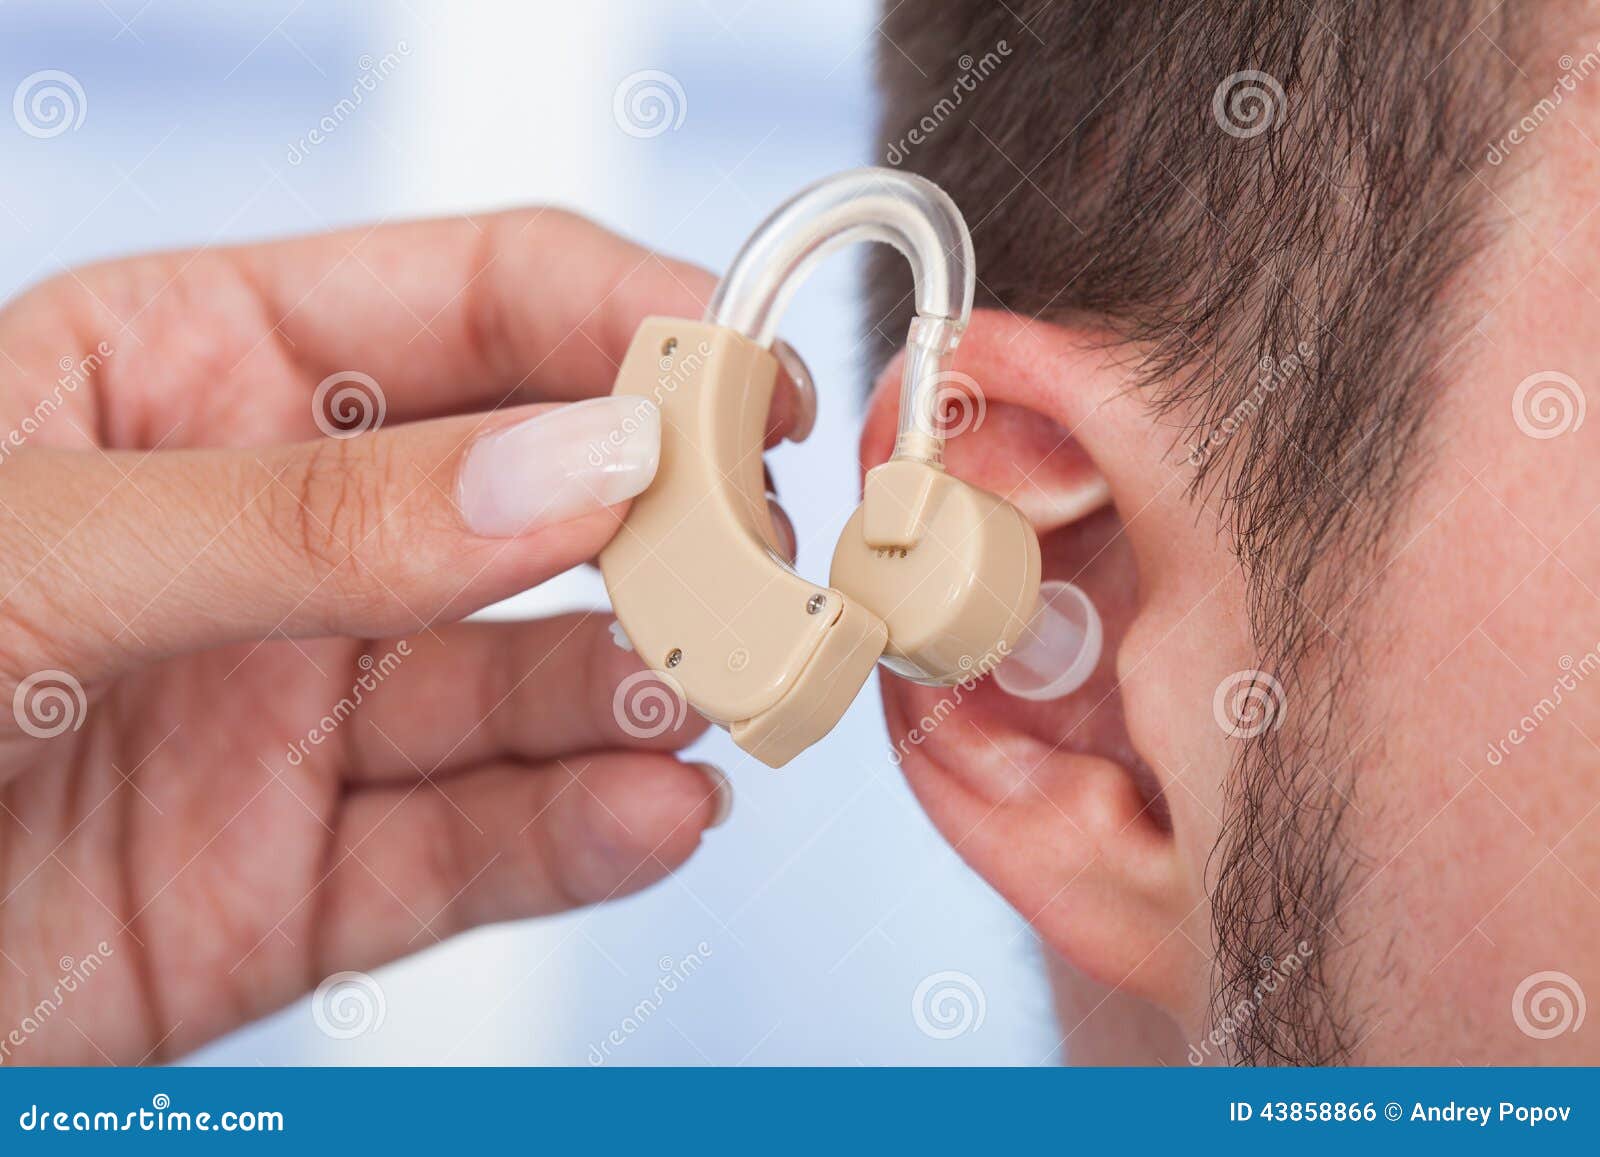 doctor inserting hearing aid in man's ear